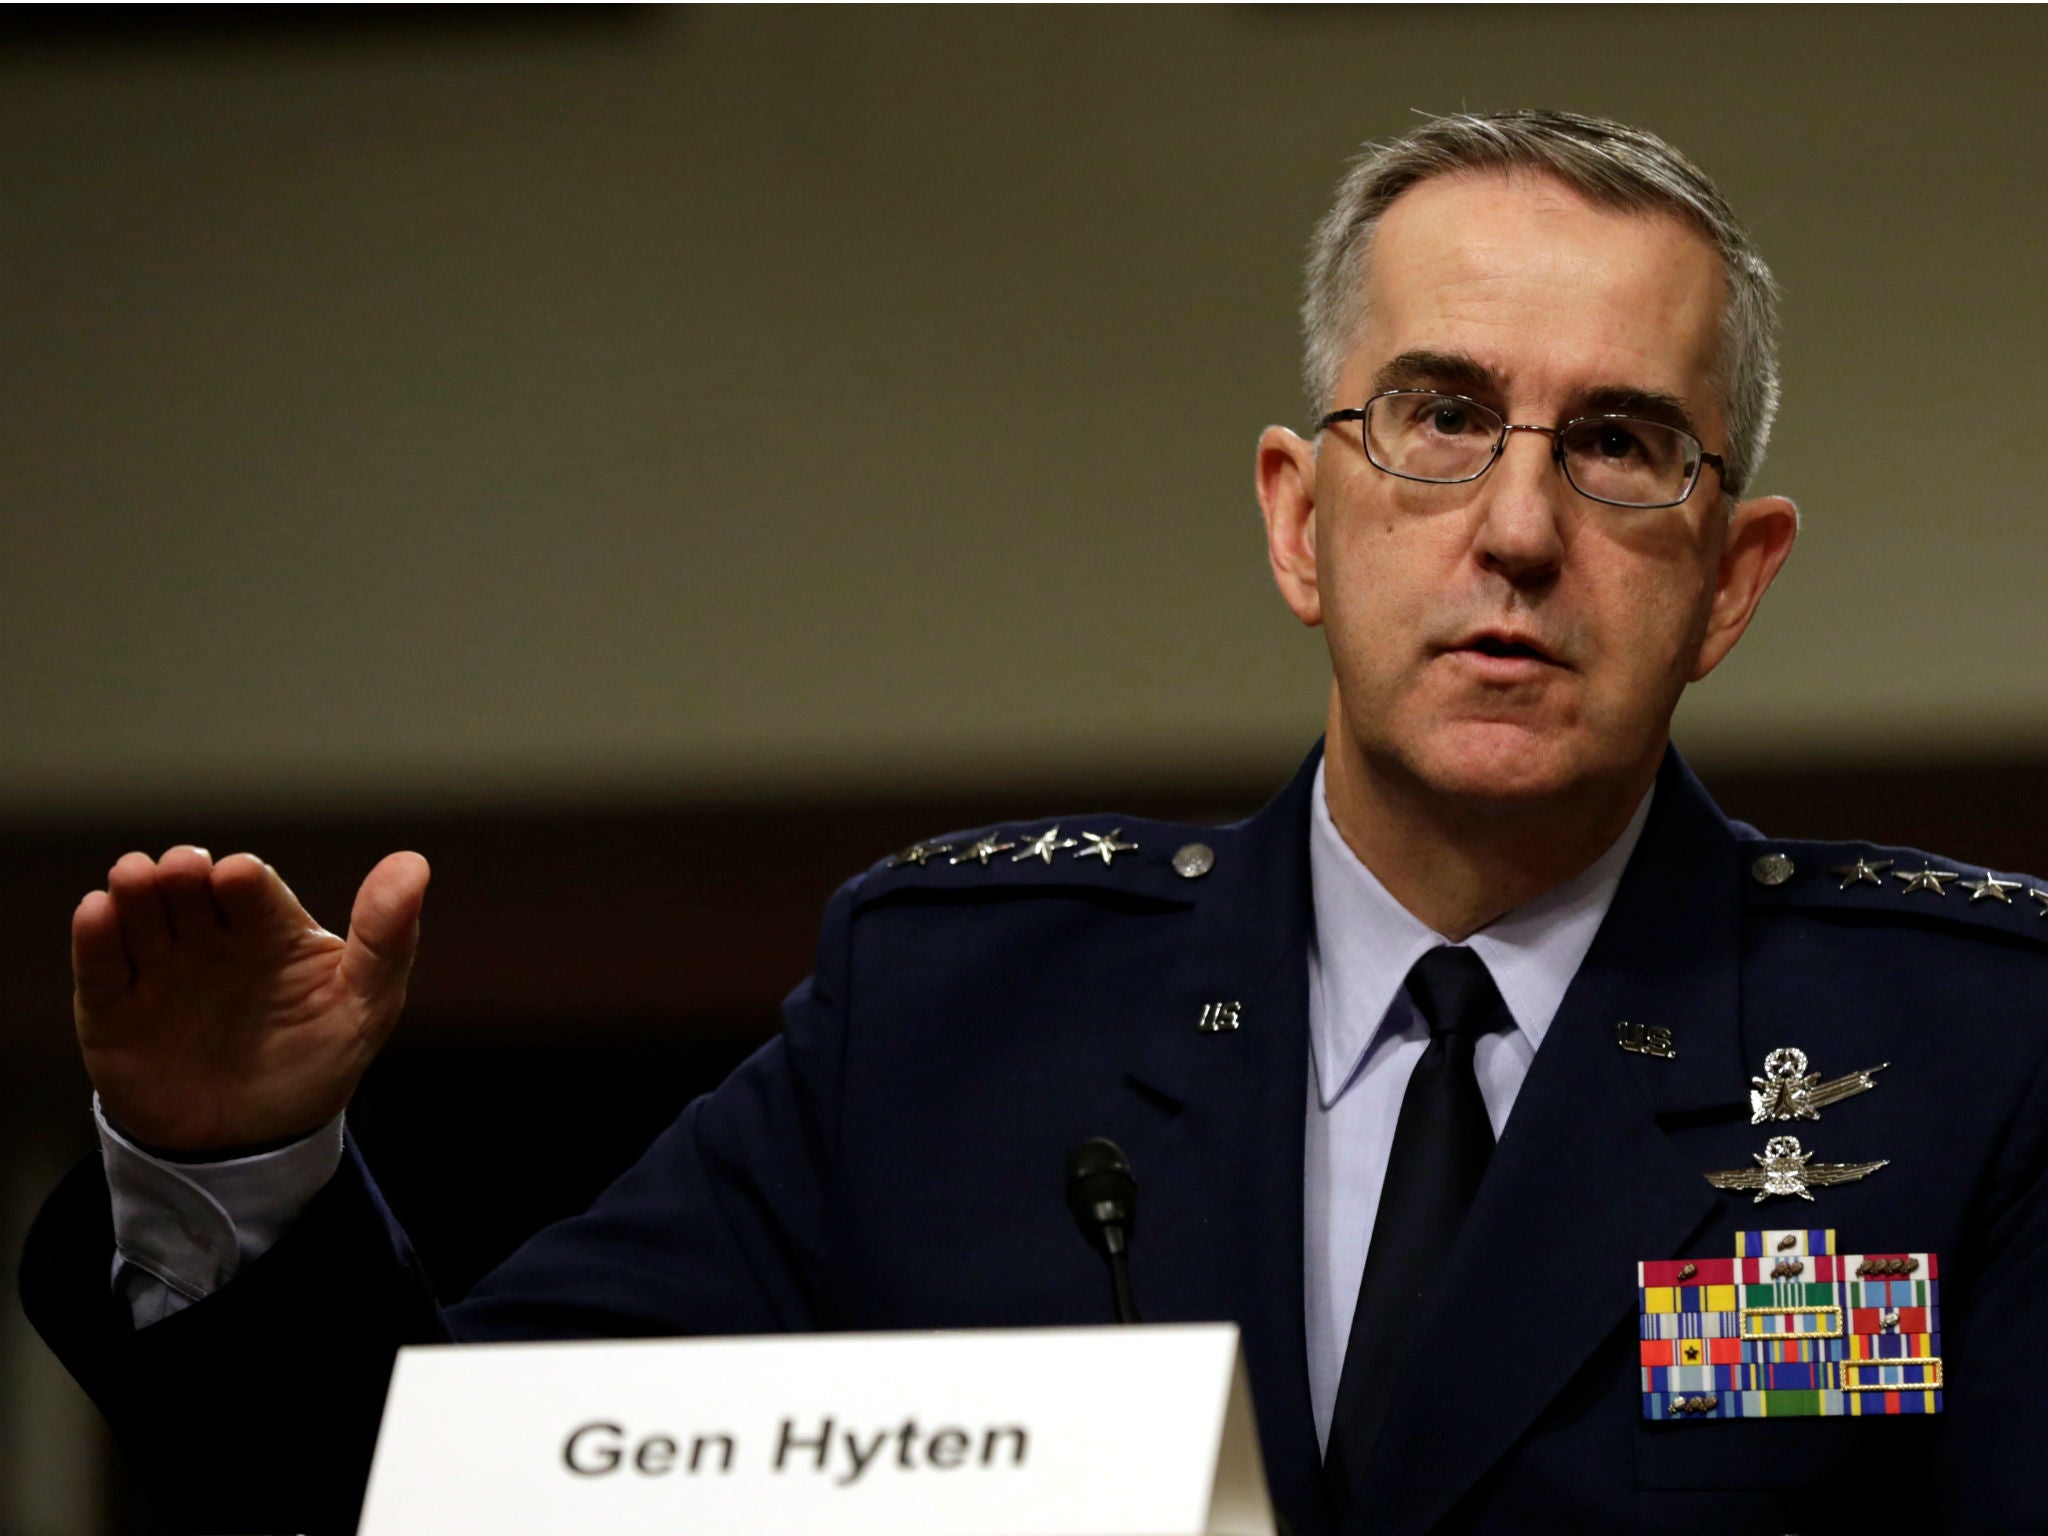 U.S. Air Force General John Hyten, seen here on Capitol Hill in Washington on April 4, 2017, said he would refuse an illegal nuclear strike order